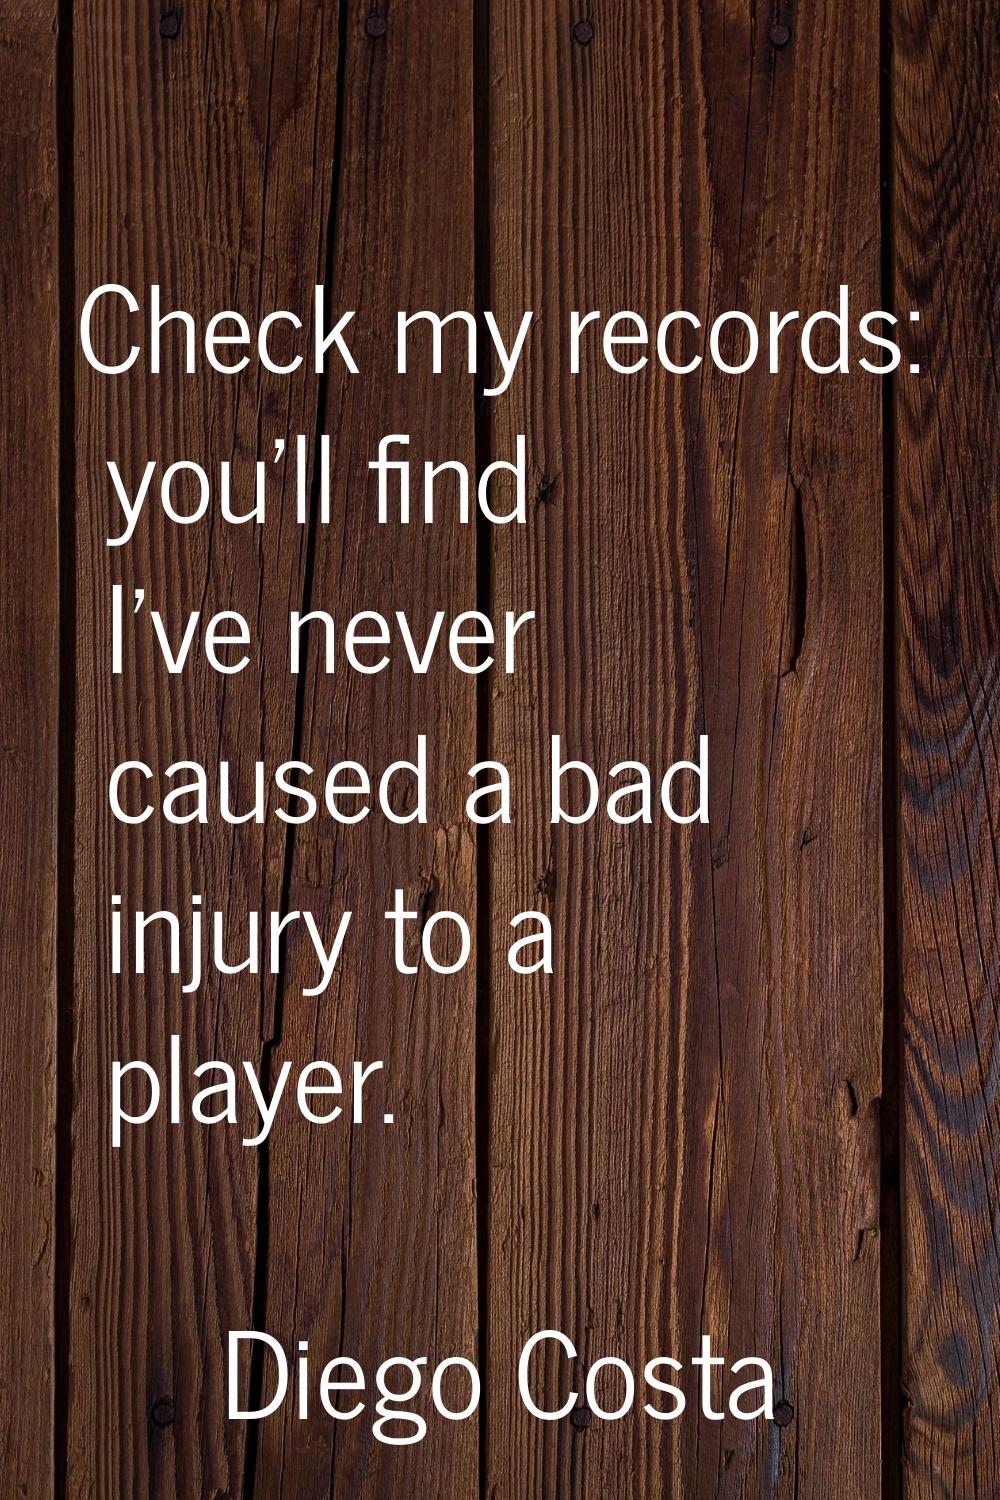 Check my records: you'll find I've never caused a bad injury to a player.